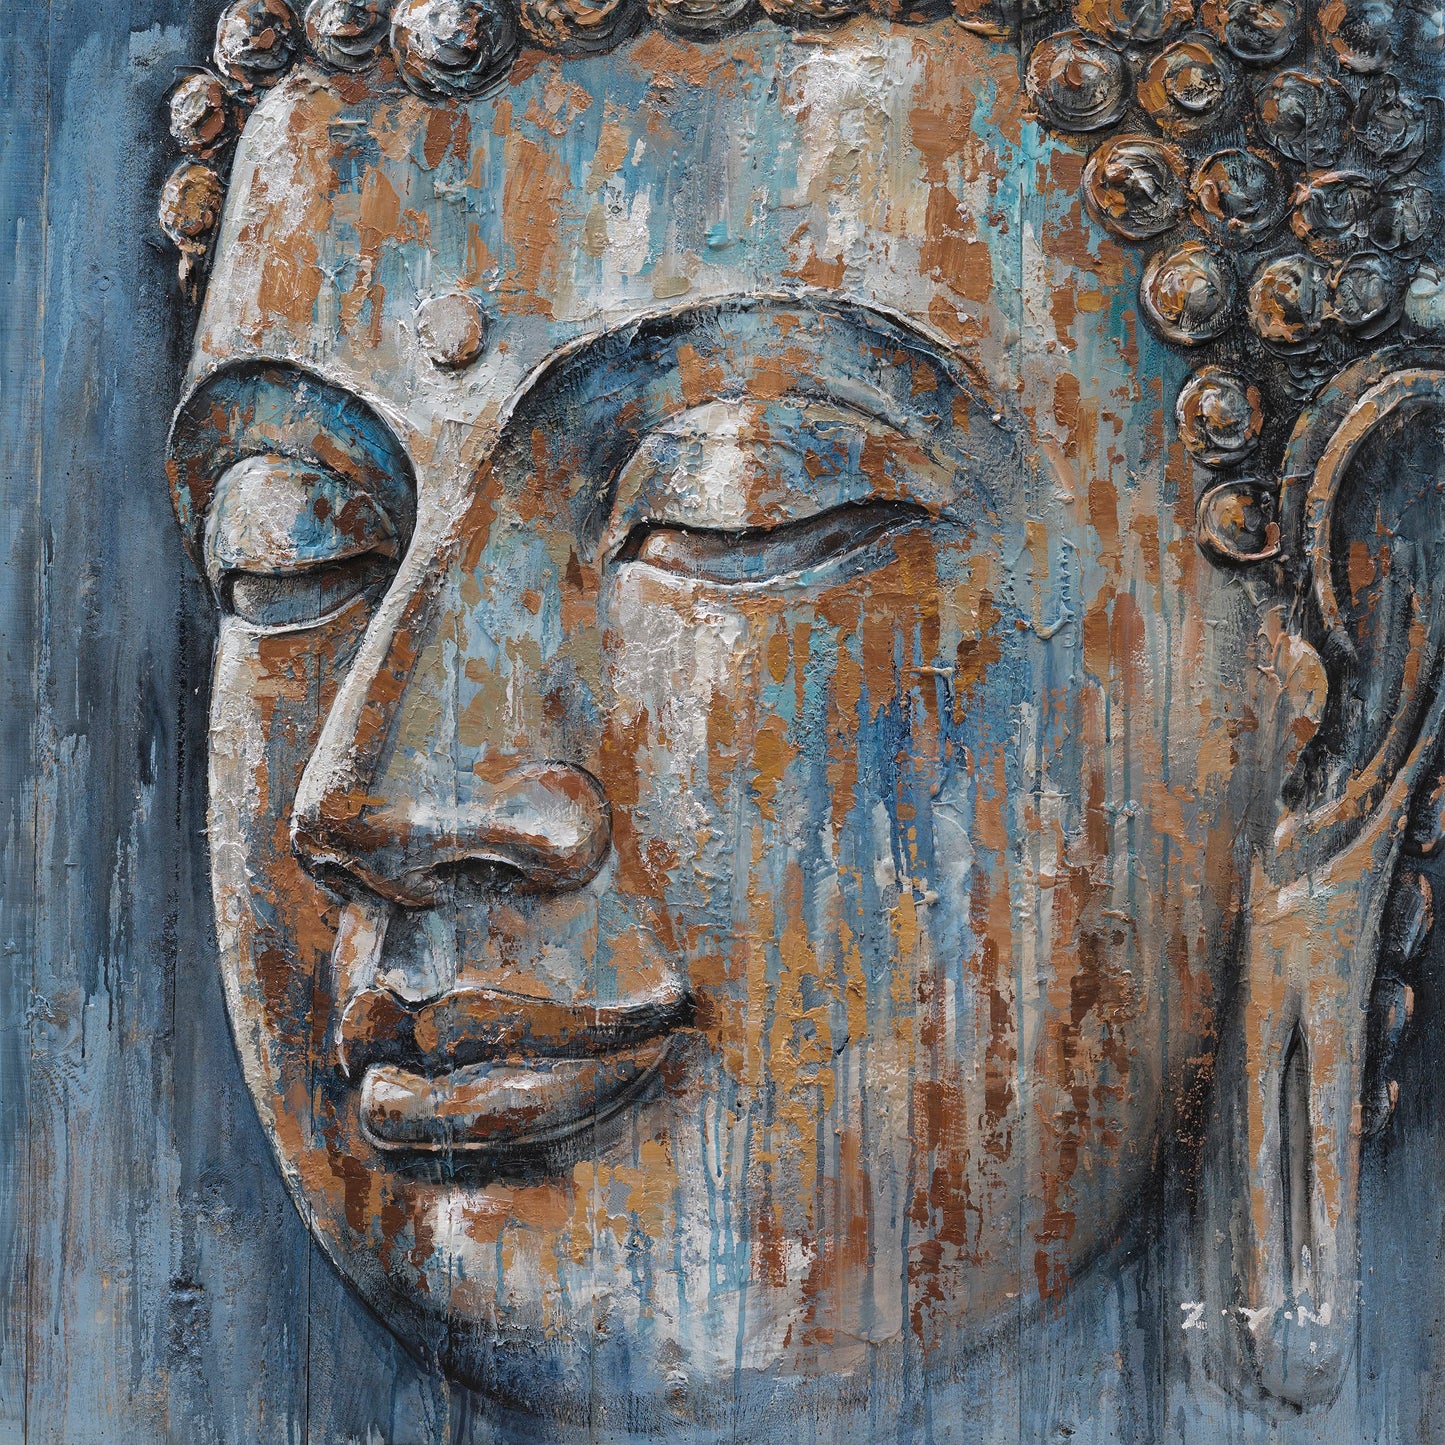 Hand-painted "Golden Buddha on blue background" Oil painting on canvas original, Canvas Wall art - Wrapped Canvas Painting